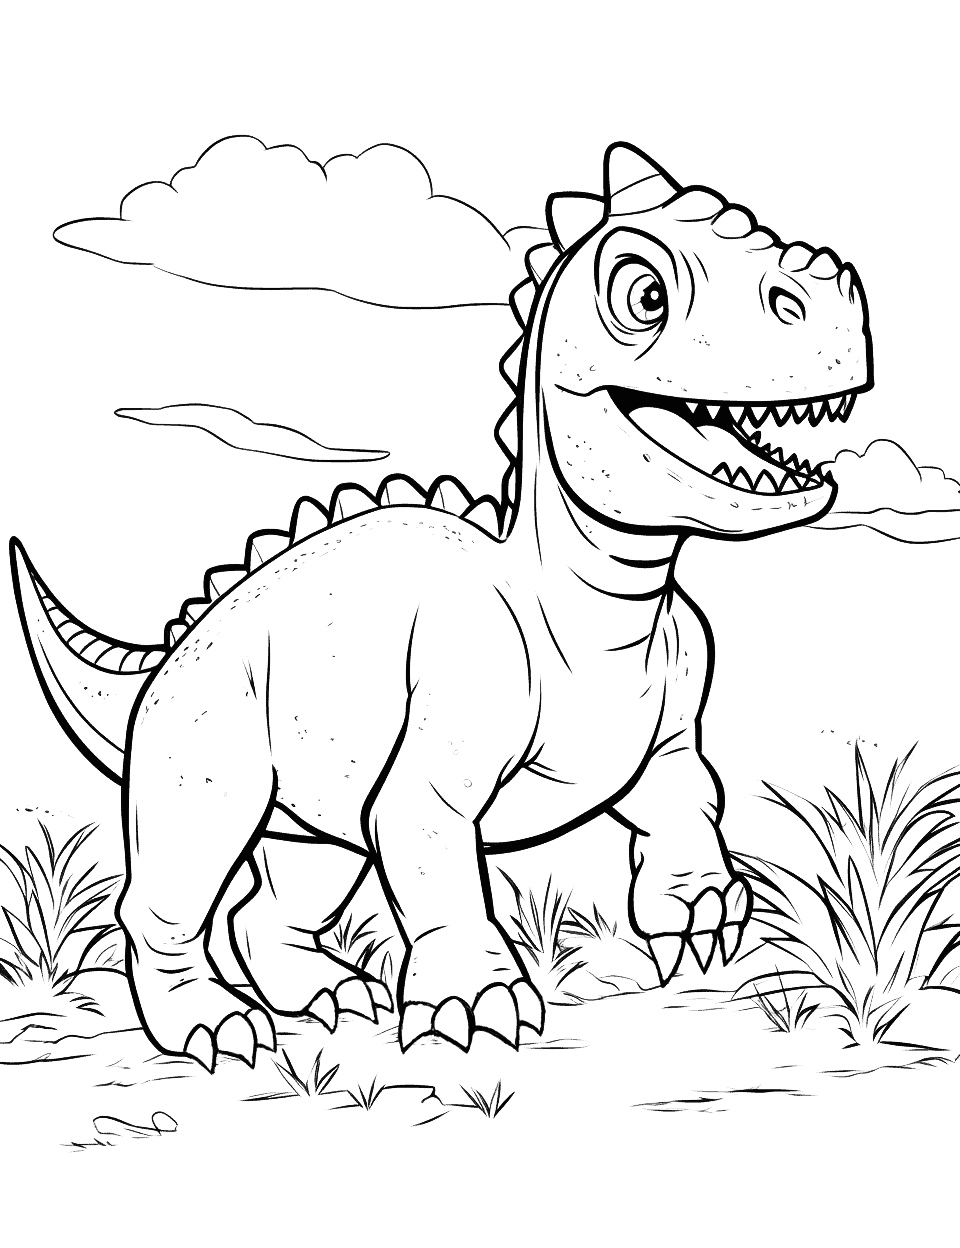 Carnotaurus on the Hunt Dinosaur Coloring Page - A Carnotaurus on the hunt, ready to pounce on its next meal.